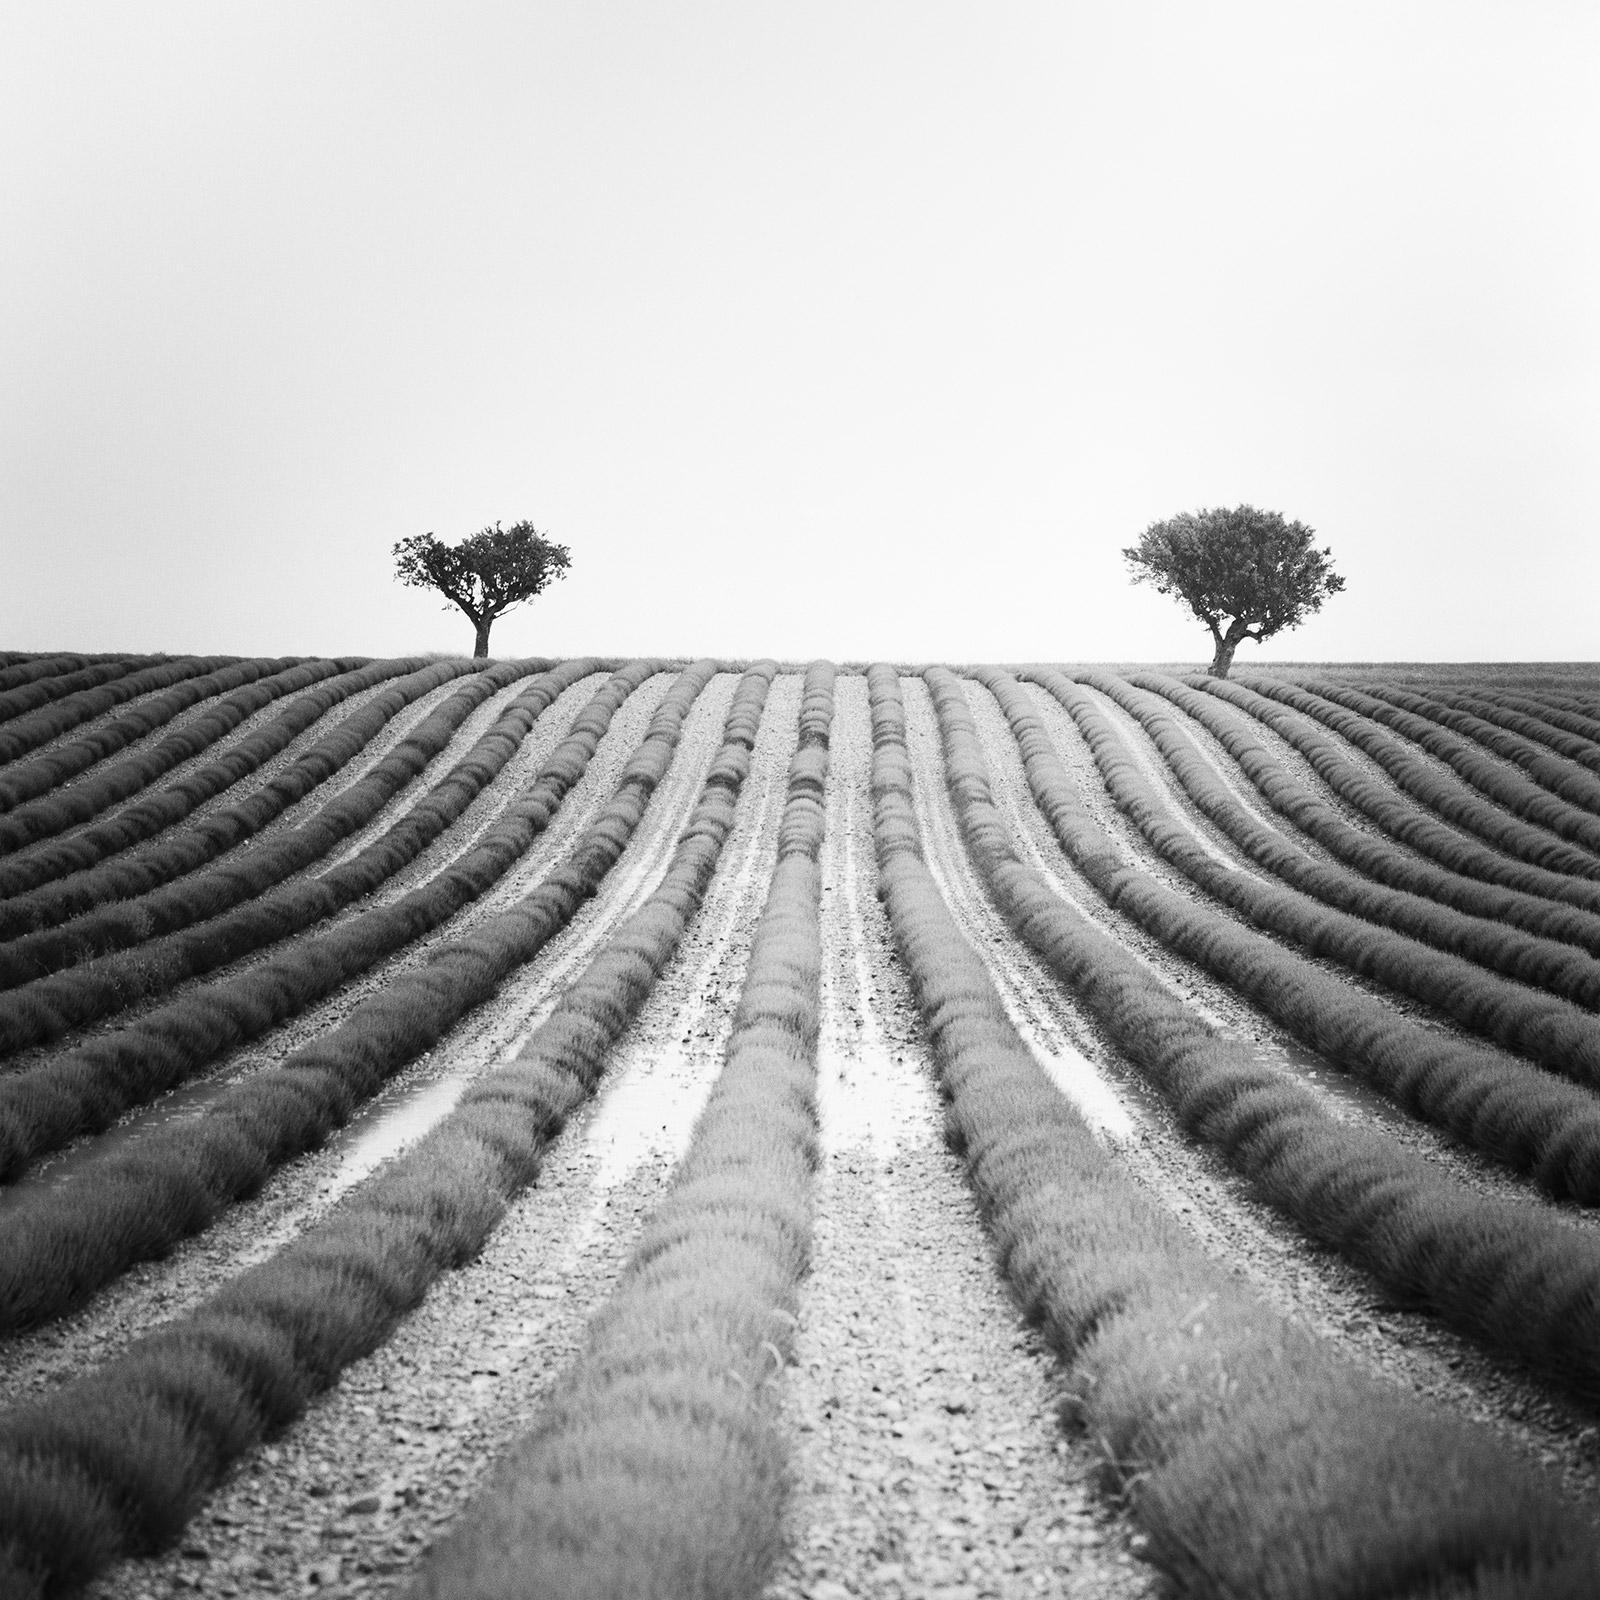 Lavender Field, two Trees, Provence, France, black white landscape photography